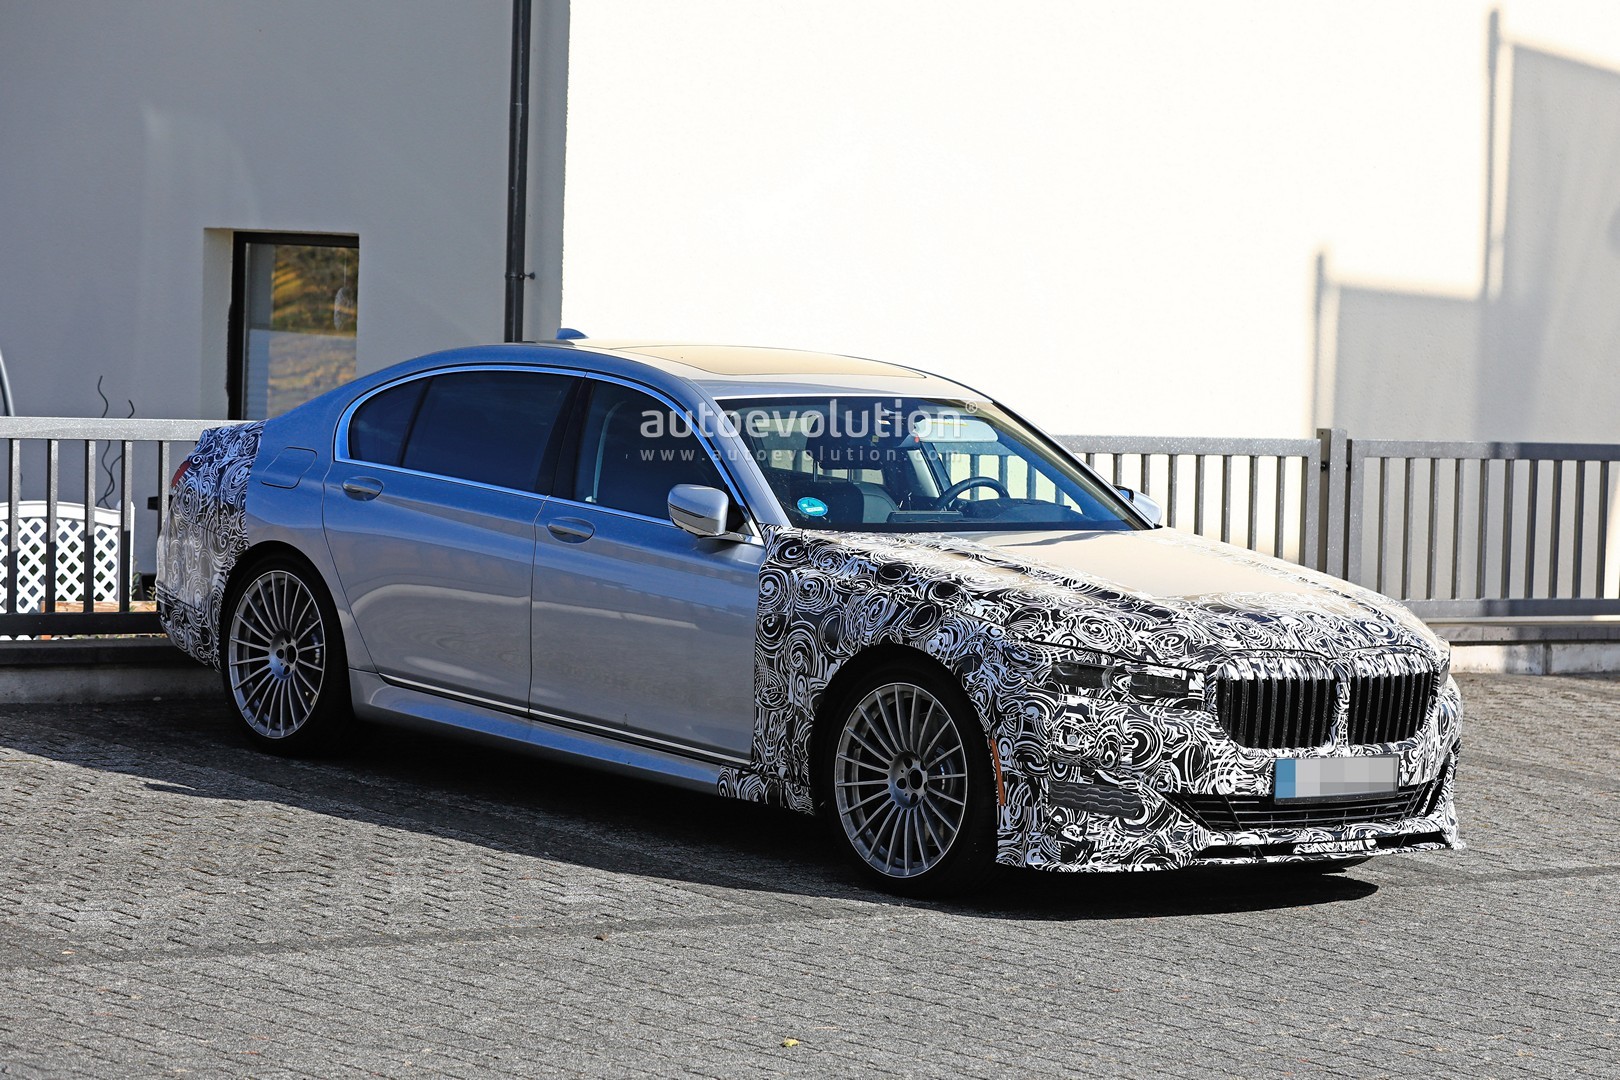 2020 Alpina B7 Spied in Detail, Looks More Aggressive Than 7 Series - autoevolution